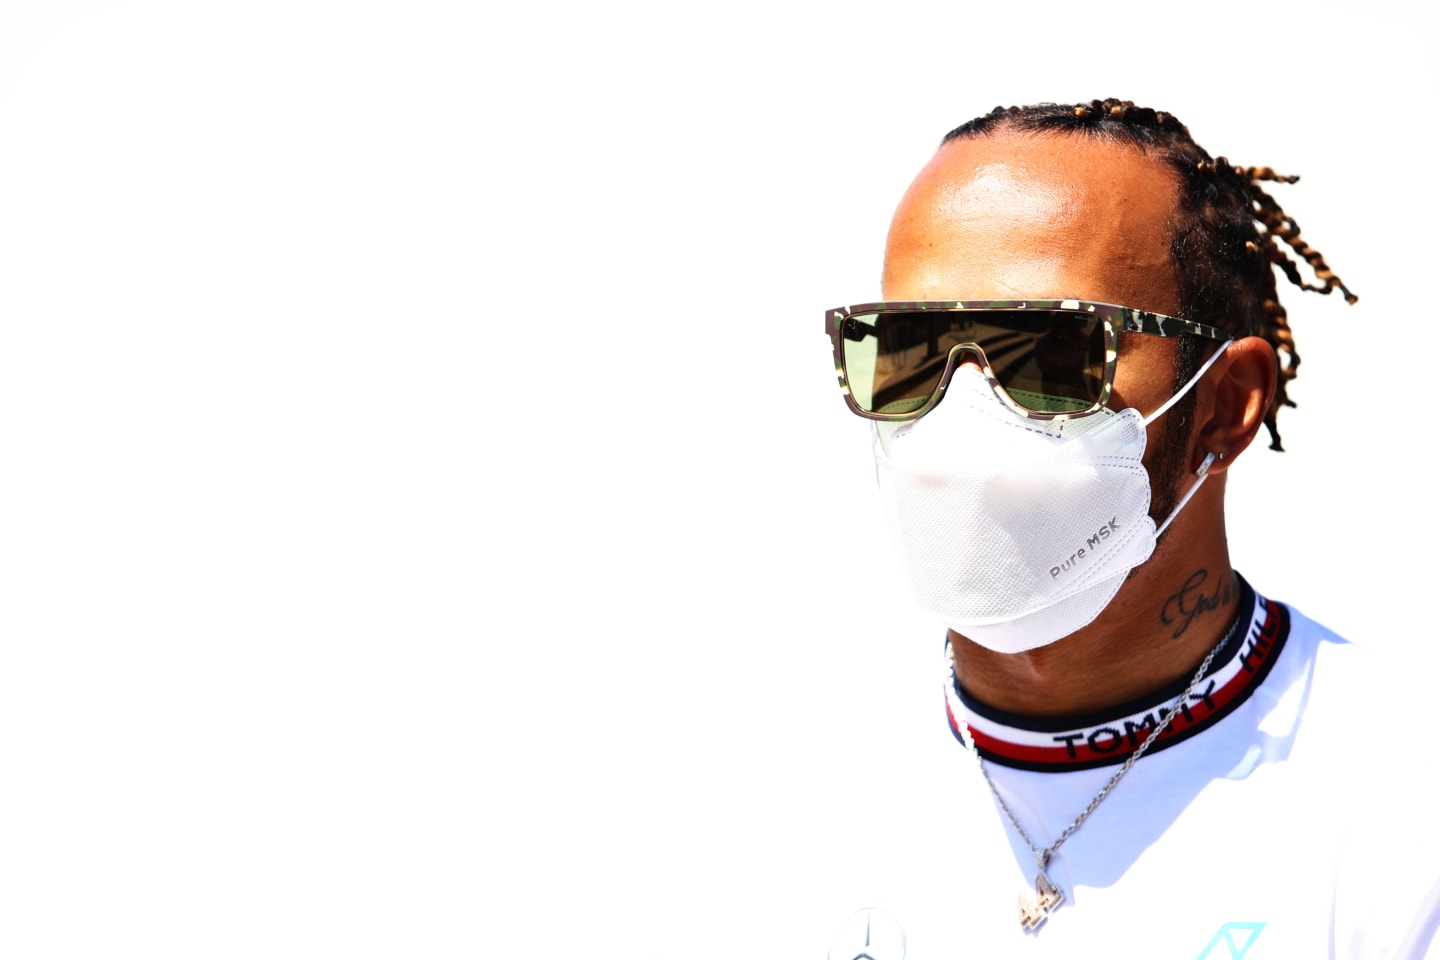 BARCELONA, SPAIN - MAY 06: Lewis Hamilton of Great Britain and Mercedes GP looks on in the Paddock